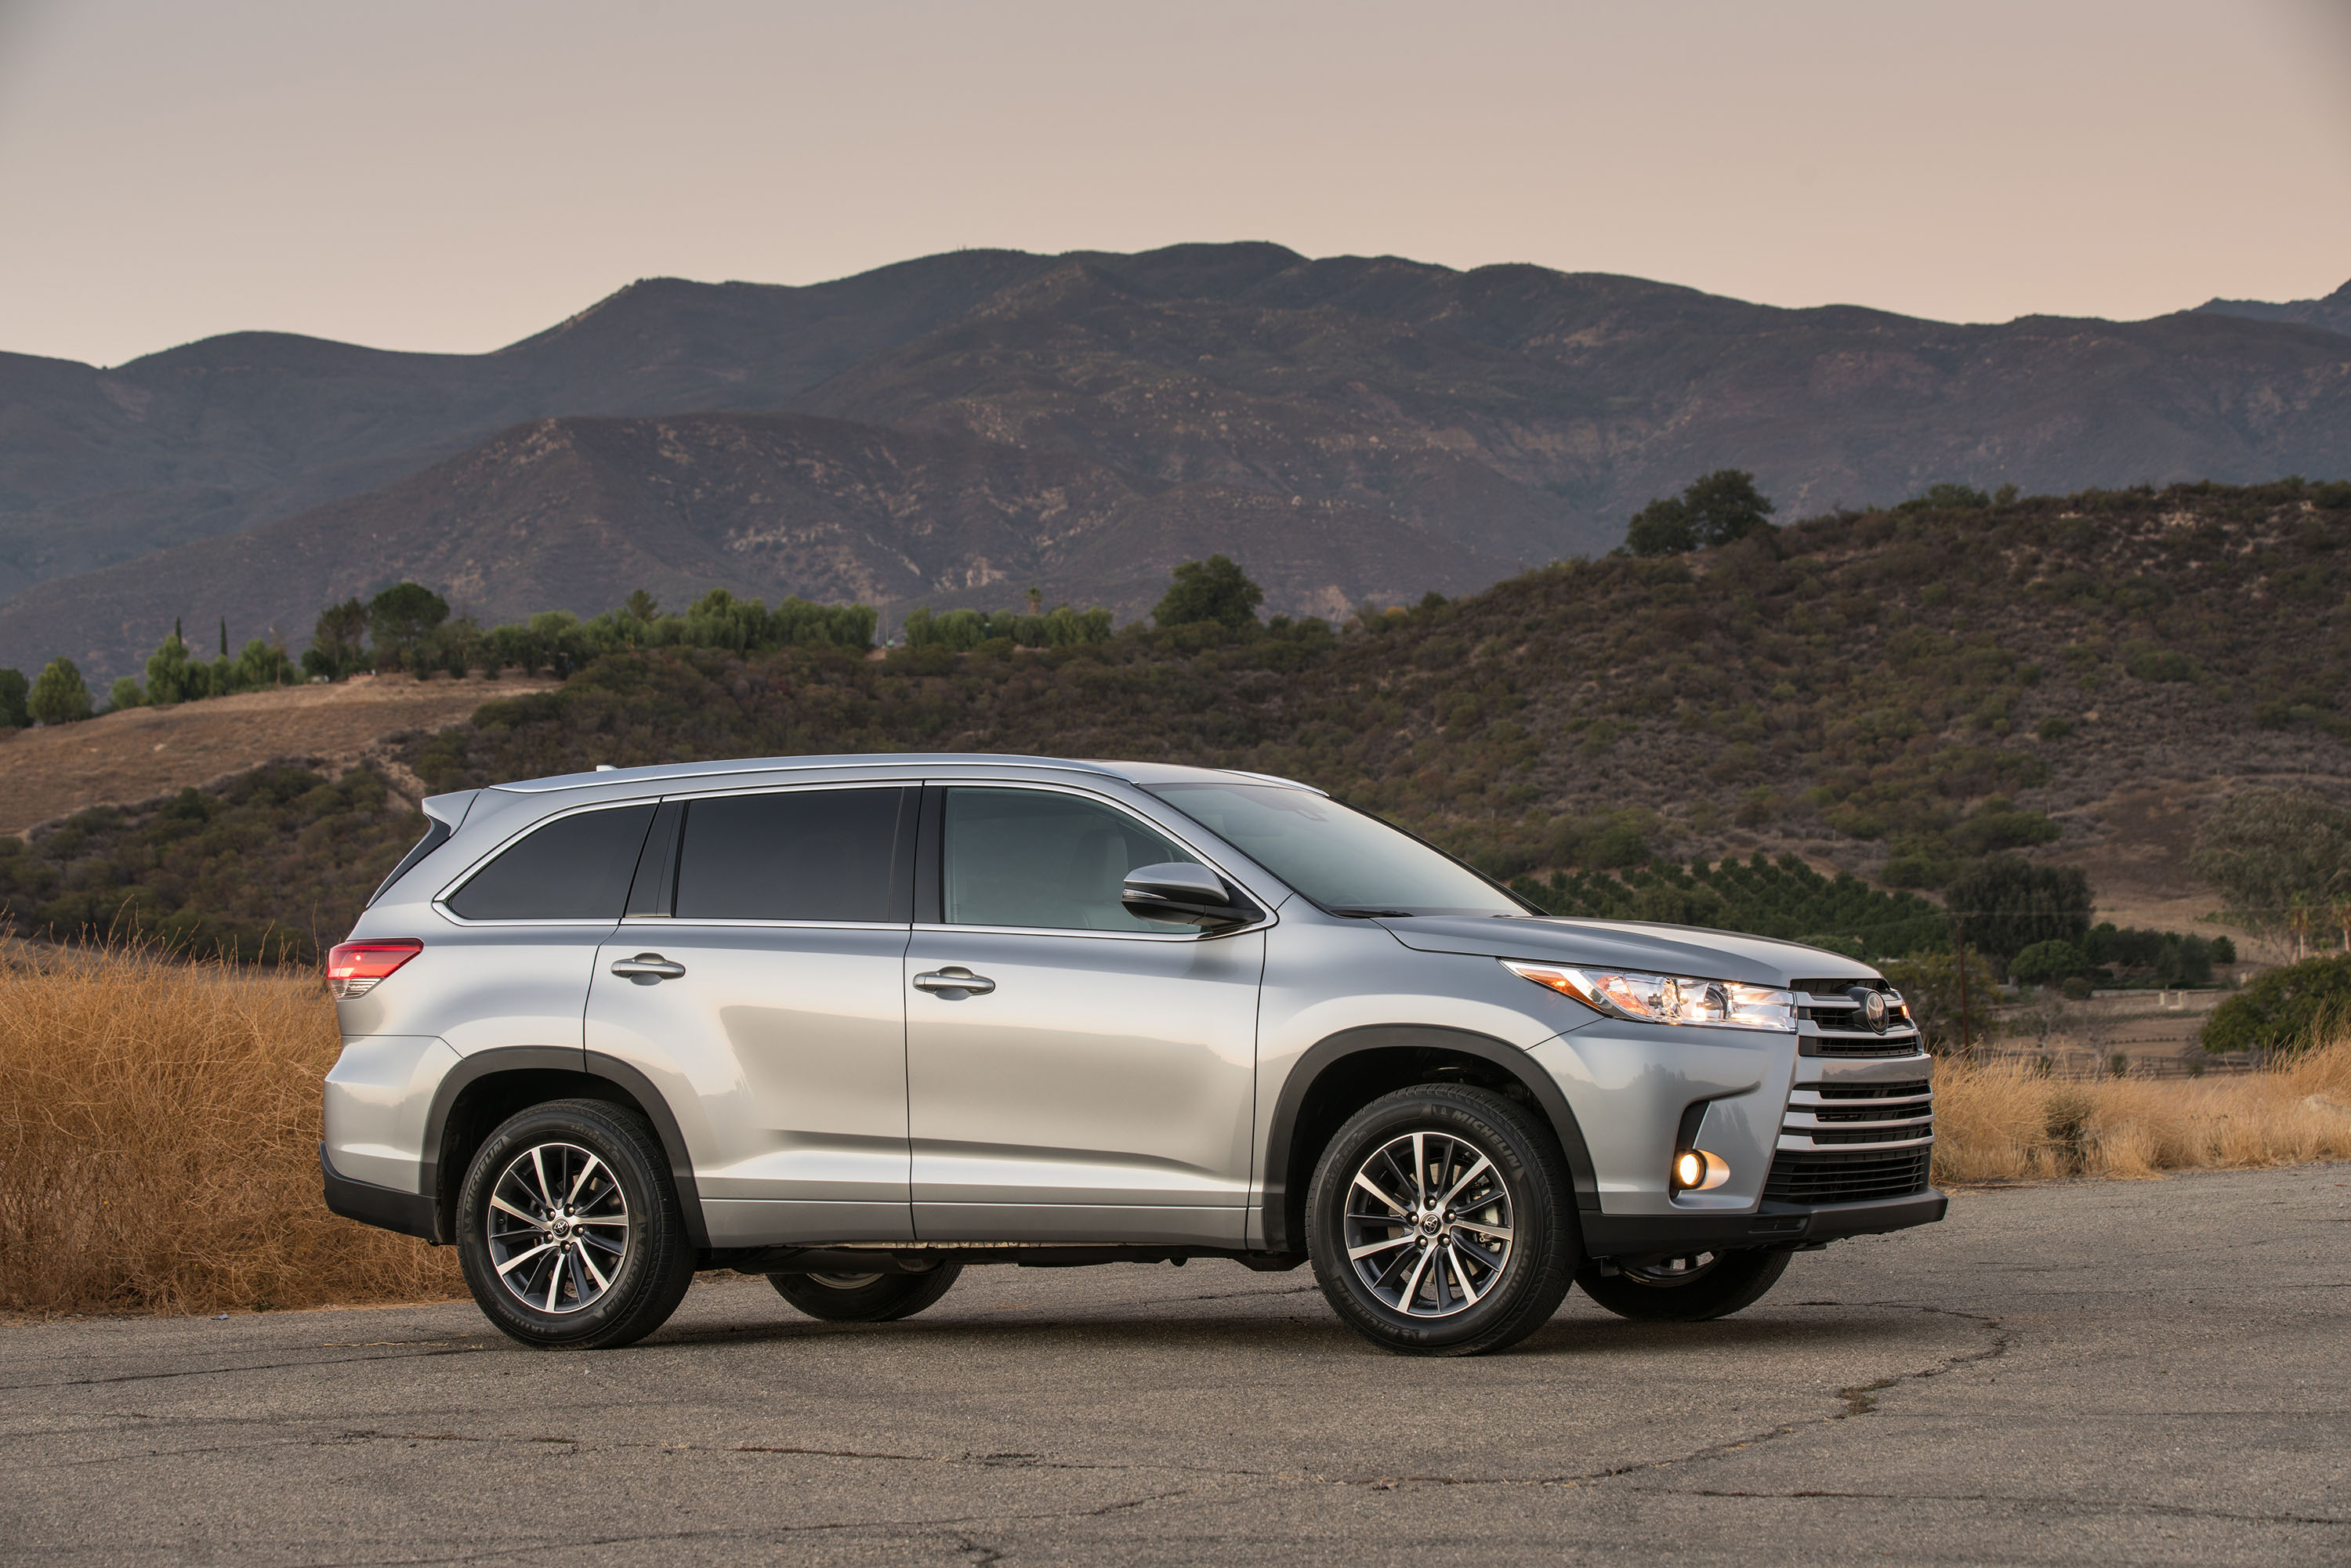 2018 Toyota Highlander Review Ratings